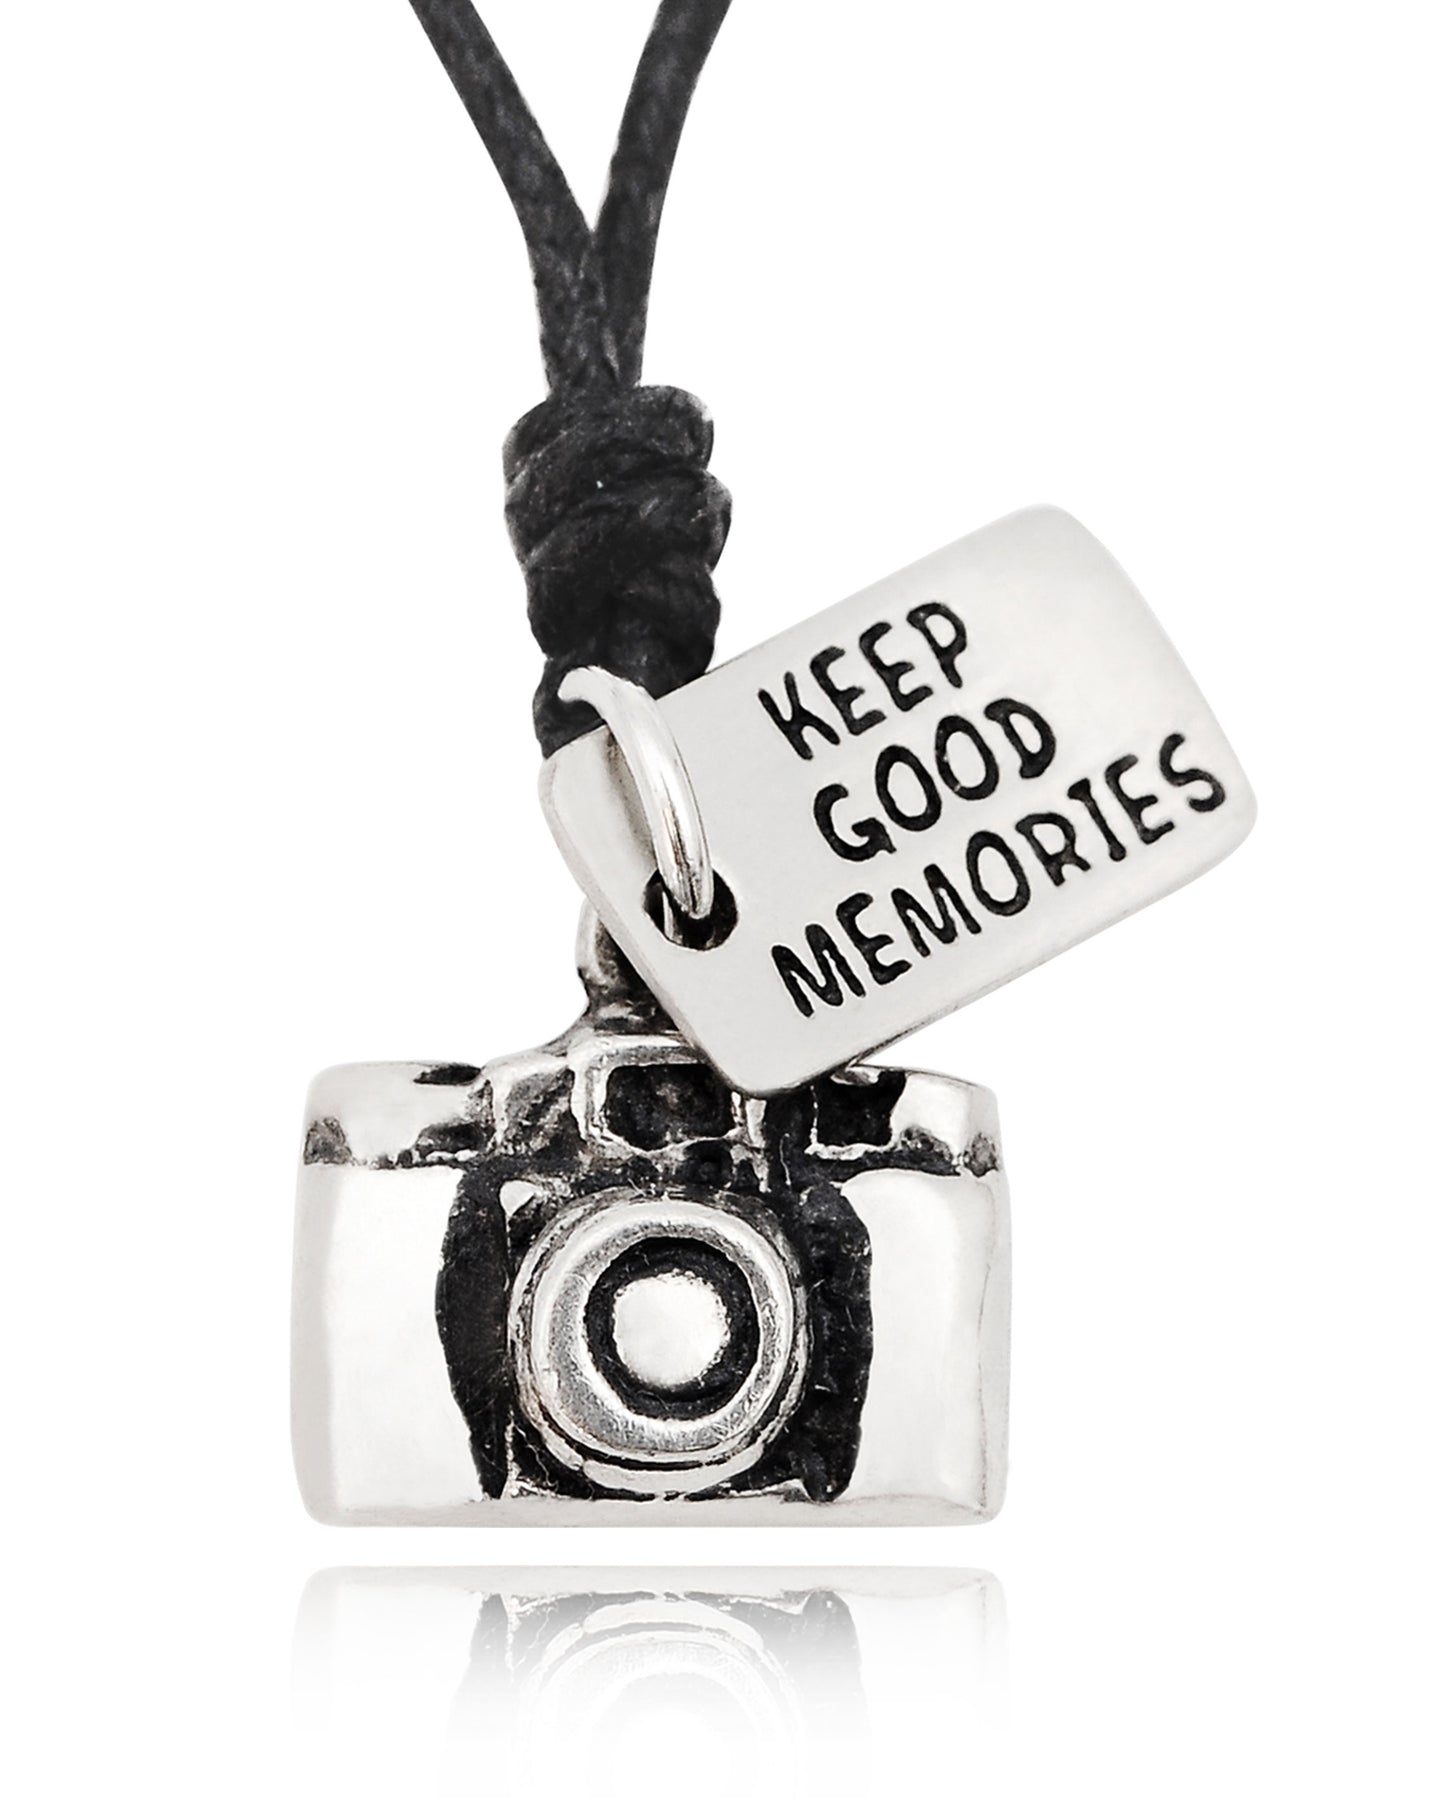 Camera Keep Good Memories Silver Pewter Charm Necklace Pendant Jewelry